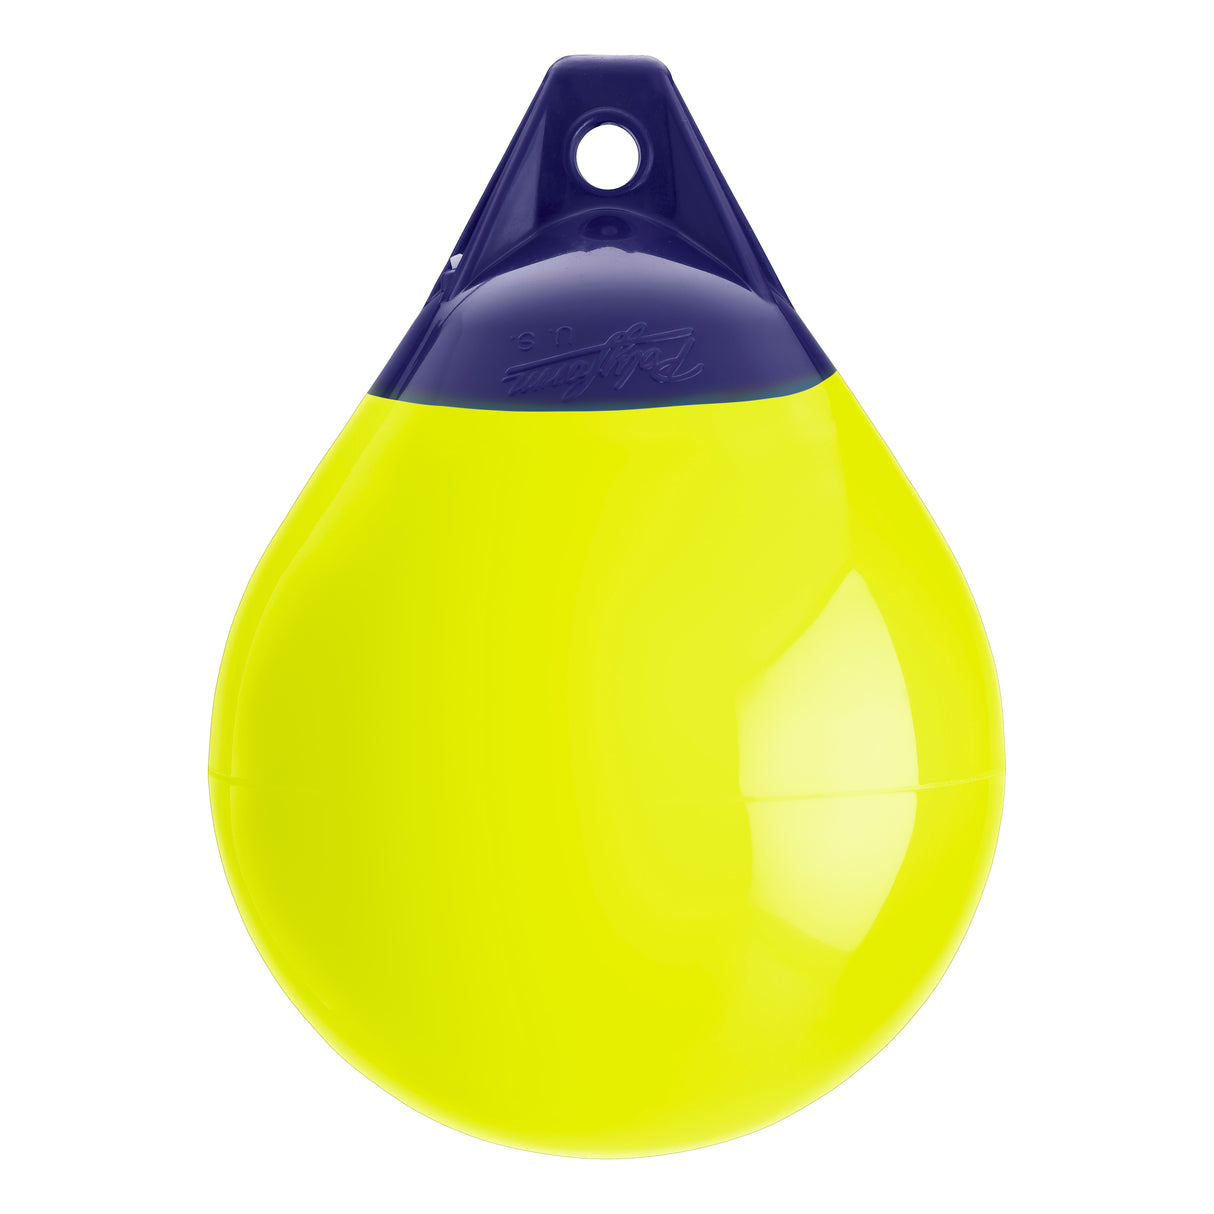 Saturn Yellow inflatable buoy, Polyform A-2 